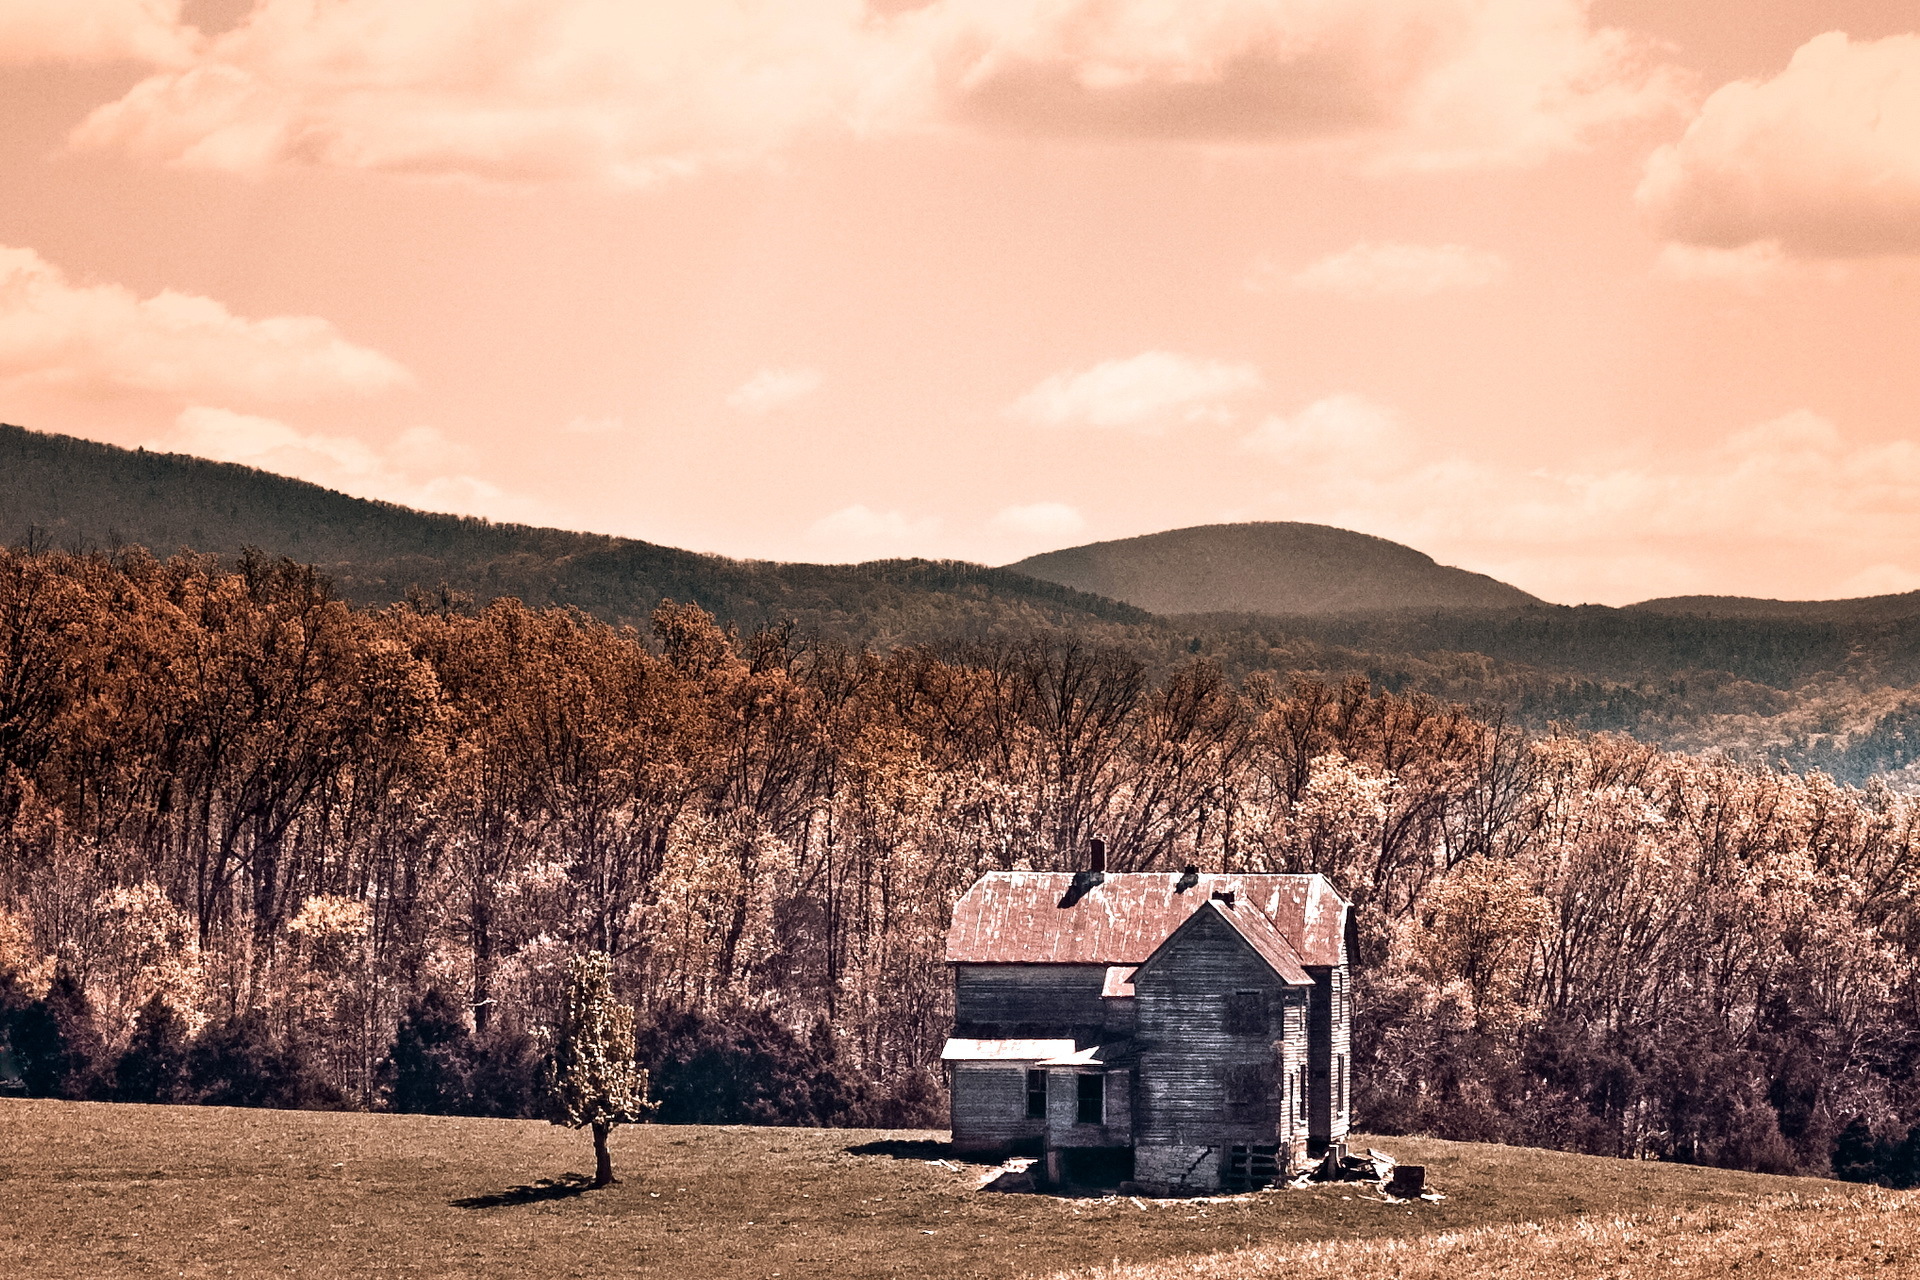 sepia, Ruins, Decay, Abandoned, Wreck, Architecture, Buildings, Houses, Fields, Farm, Trees, Forest, Leves, Autumn, Fall, Seasons, Hill, Mountains, Sky, Clouds, Sunlight Wallpaper